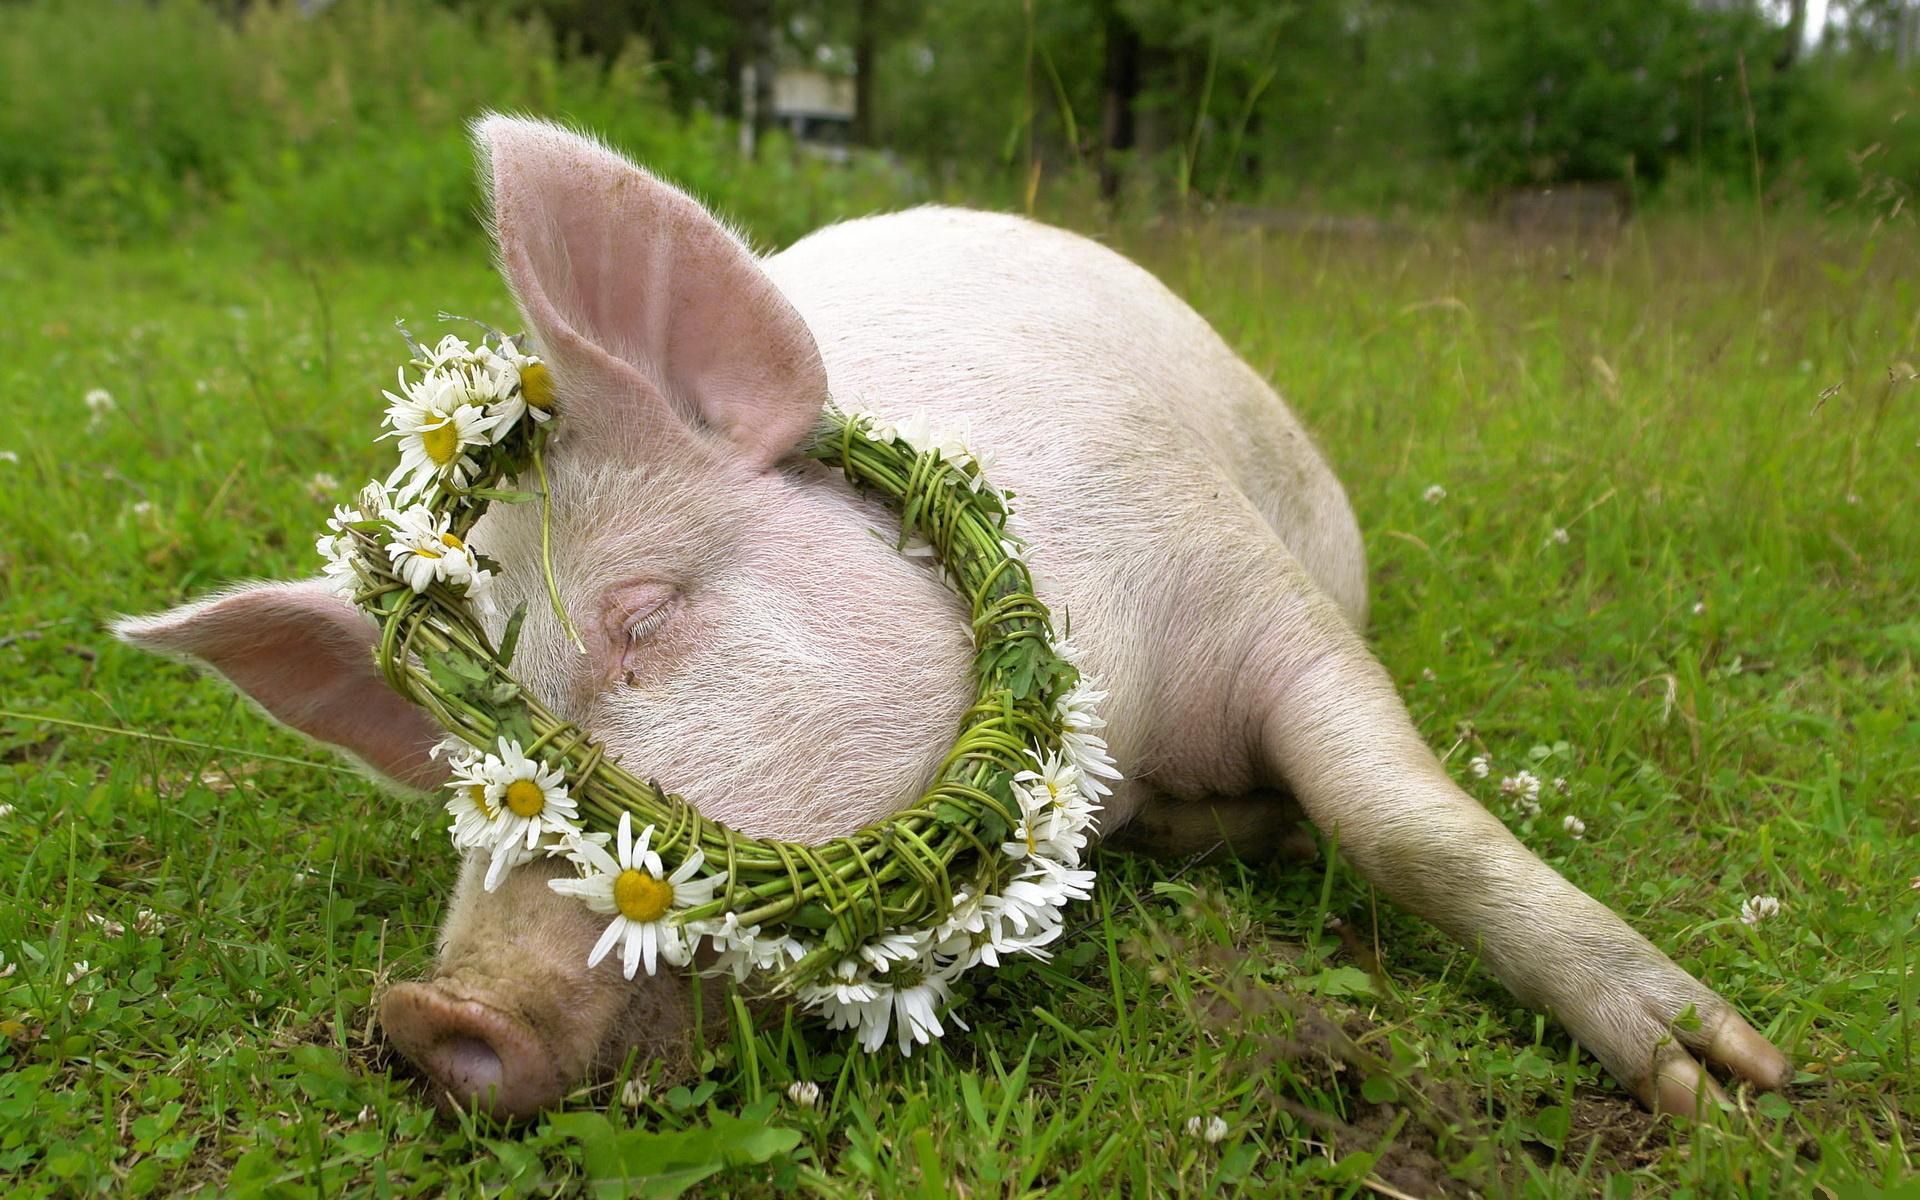 android animals, flowers, grass, camomile, to lie down, lie, chamomile, wreath, pig